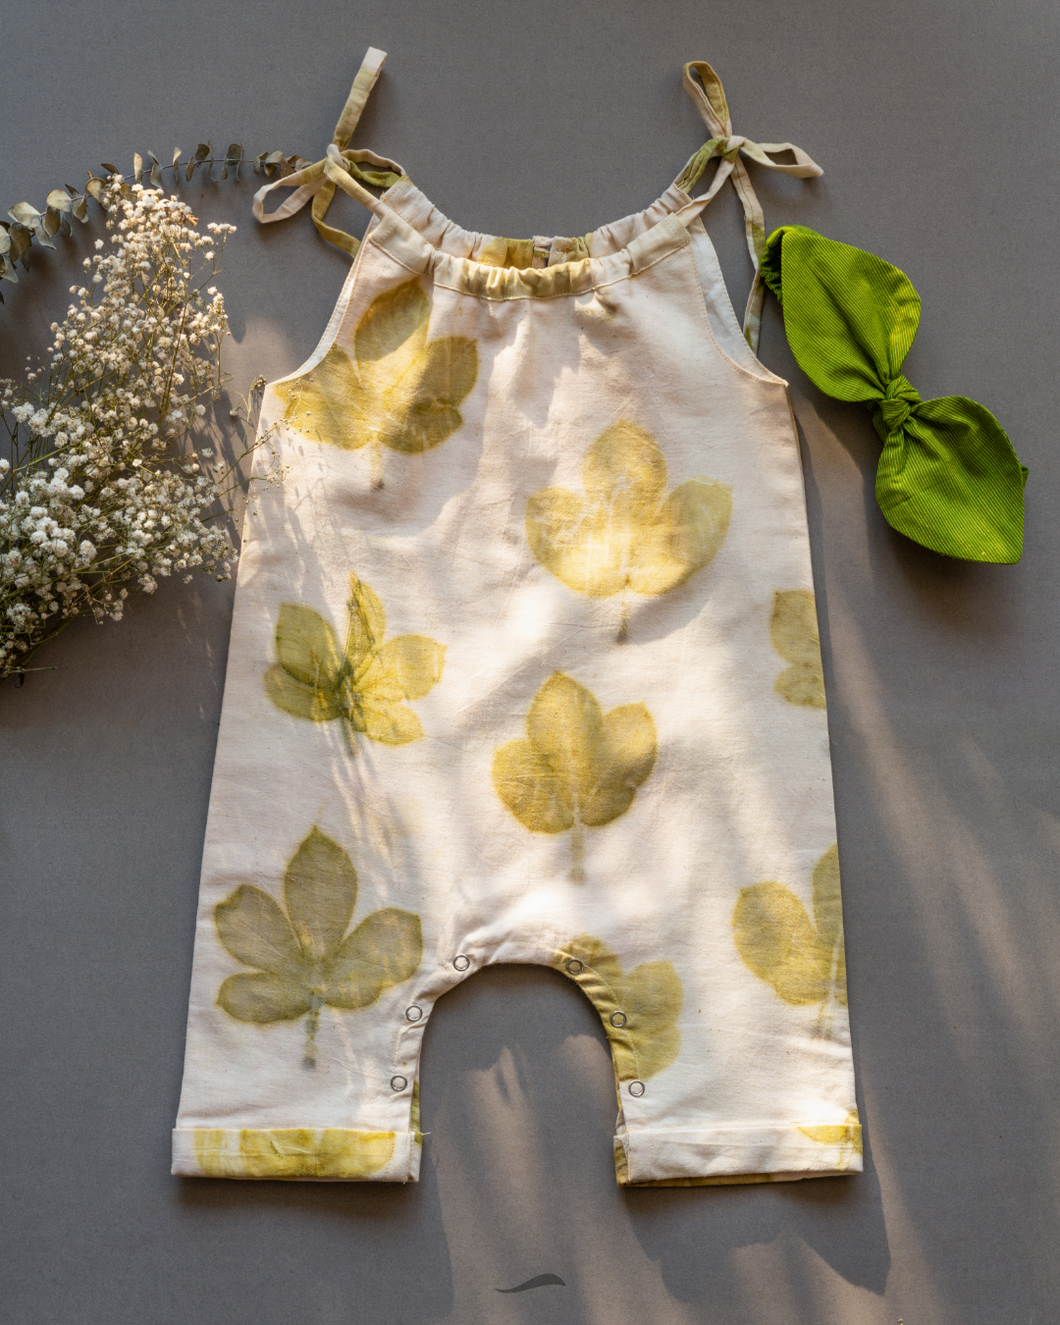 A cute baby girl dress made of eco-printed Indian maple leaves on it along with matching hair accessory and some flower aside.